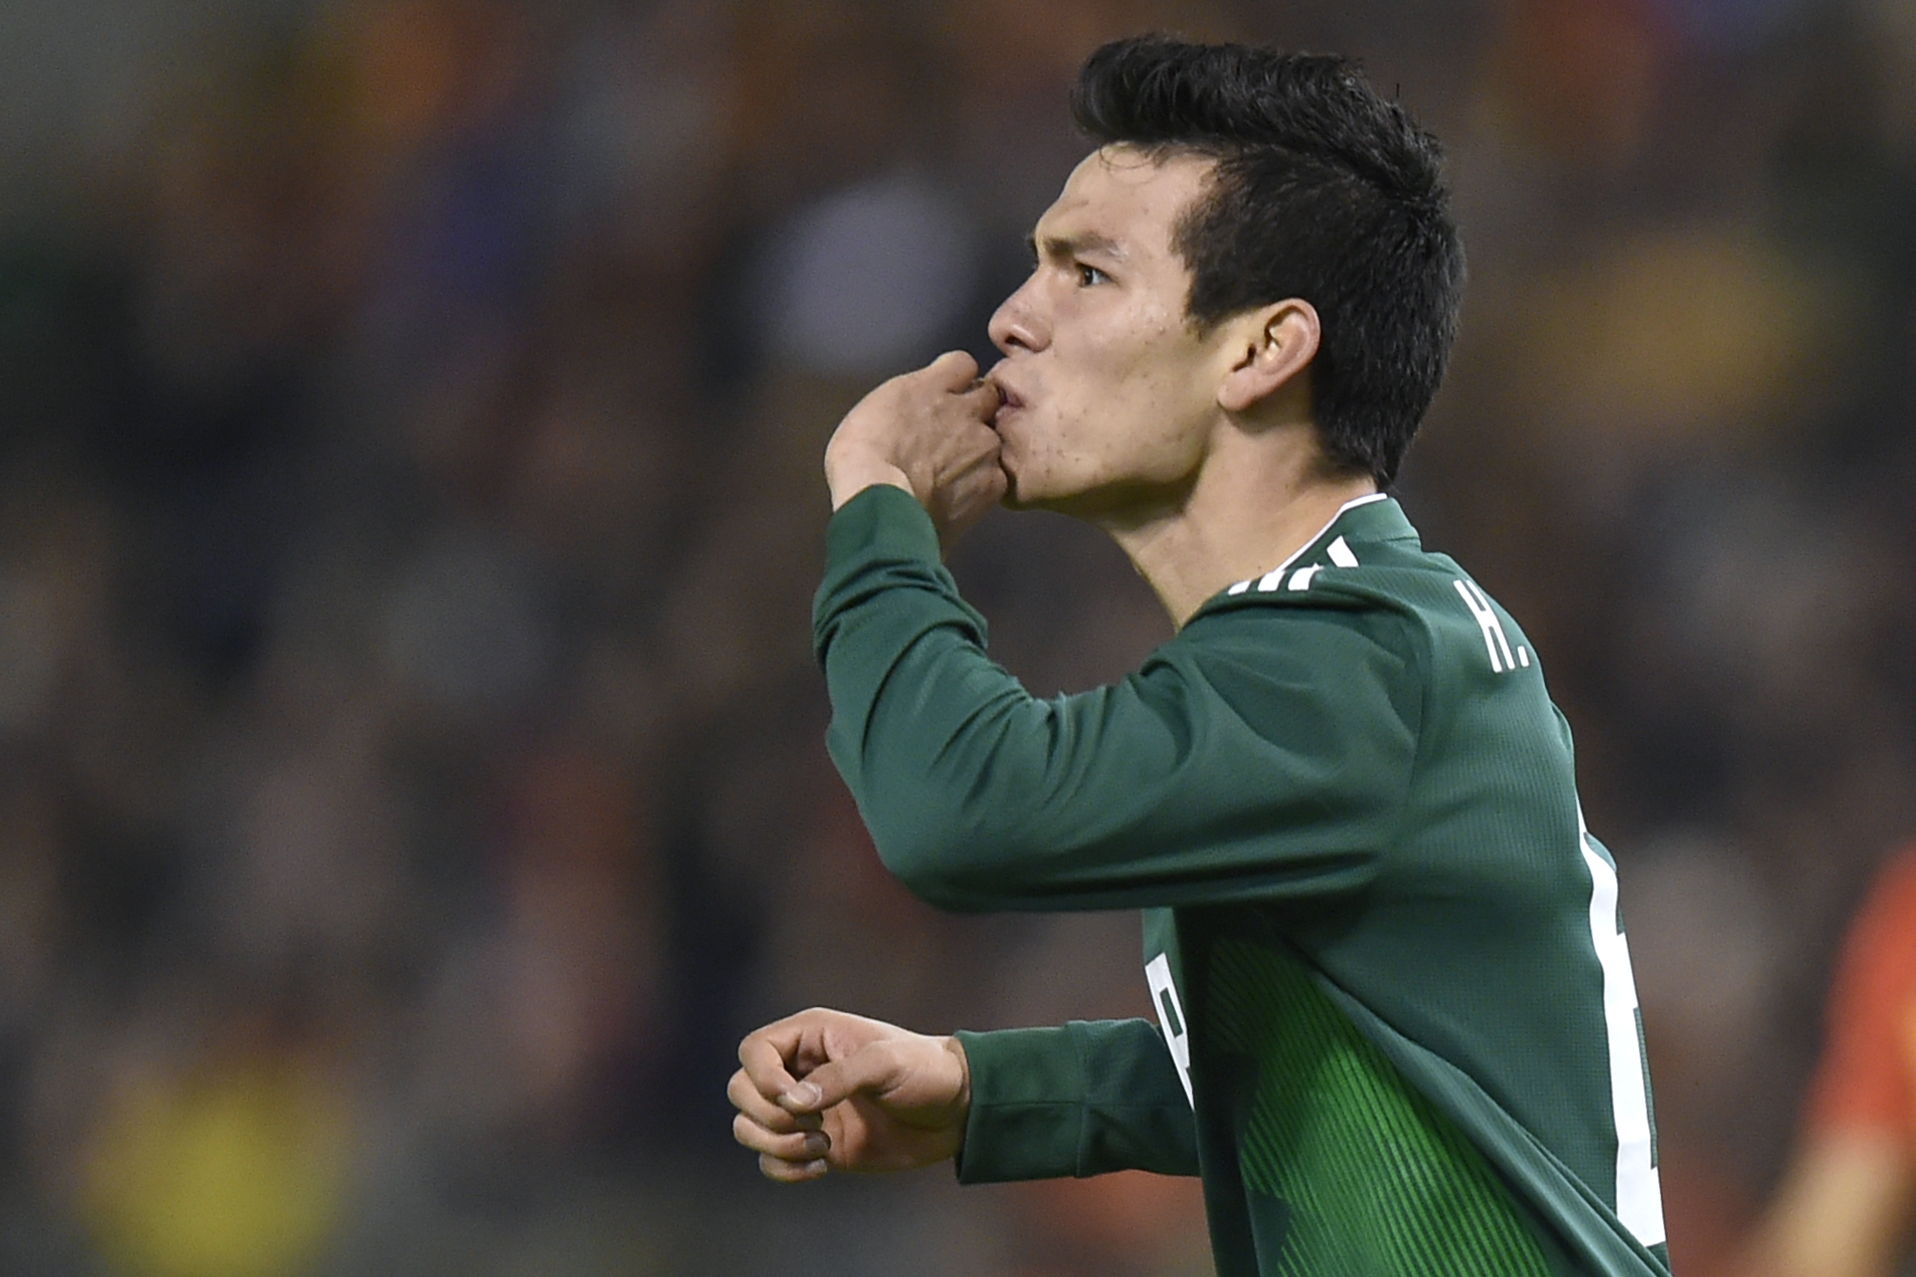 Mexico's forward Hirving Lozano celebrates after scoring a goal  during the international friendly football match between Belgium and Mexico at the King Baudouin Stadium in Brussels on November 10, 2017. / AFP PHOTO / JOHN THYS        (Photo credit should read JOHN THYS/AFP/Getty Images)